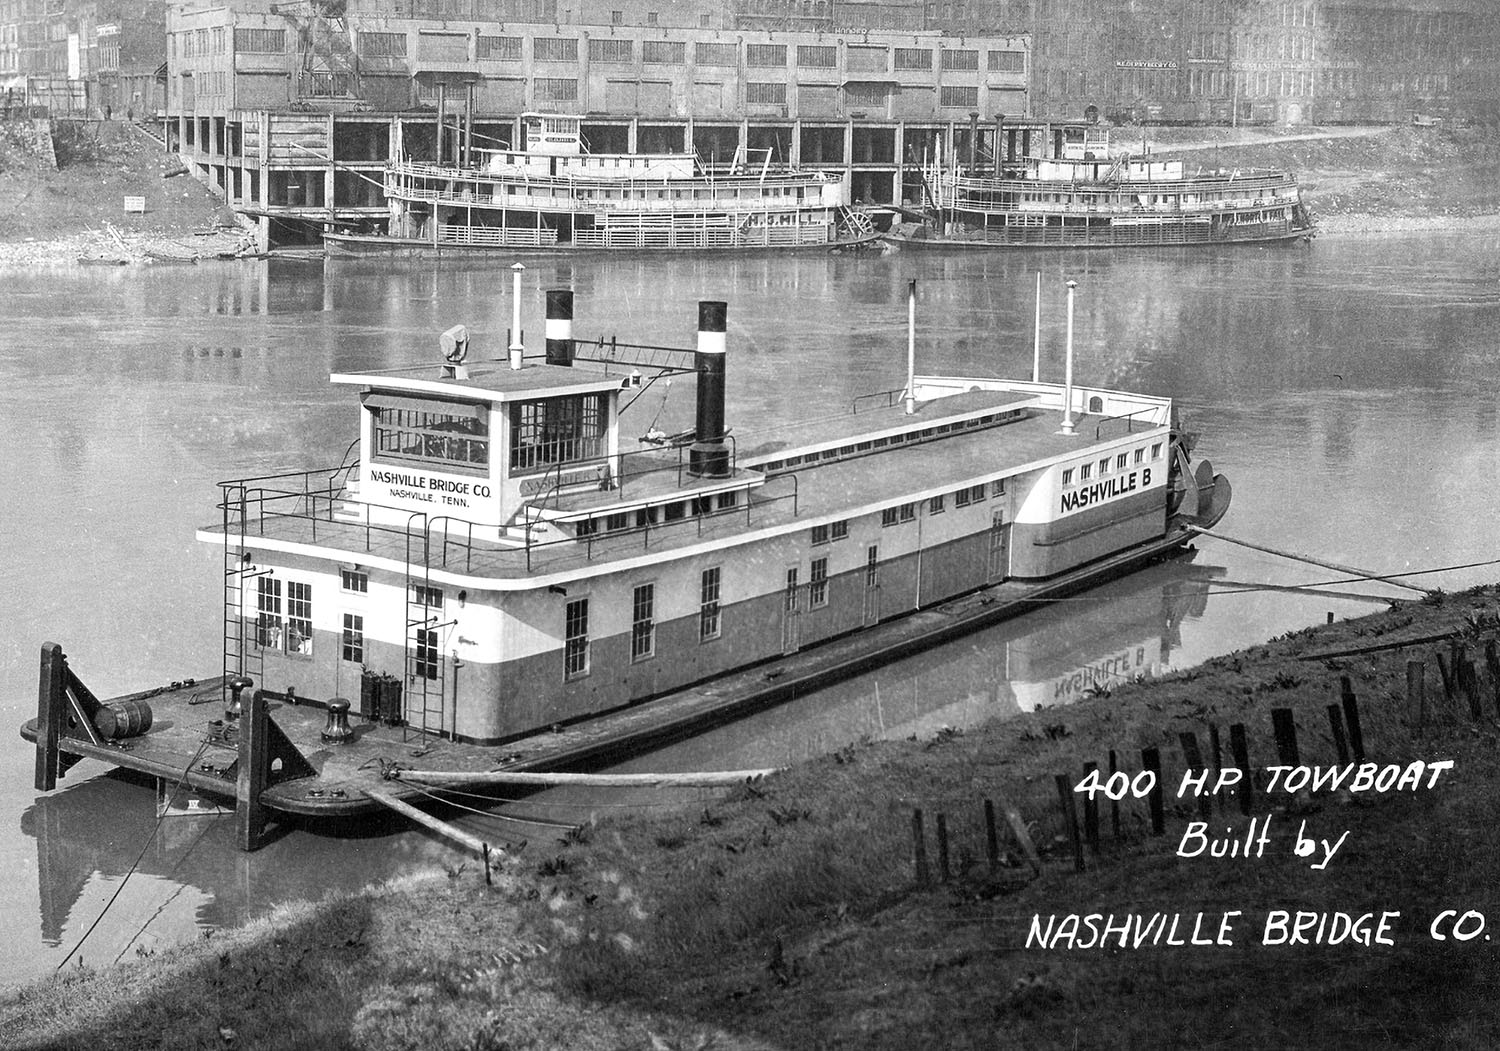 New at Nashville. Note the packets H.G. Hill and Jo Horton Fall in the background. (Dan Owen Boat Photo Museum collection)